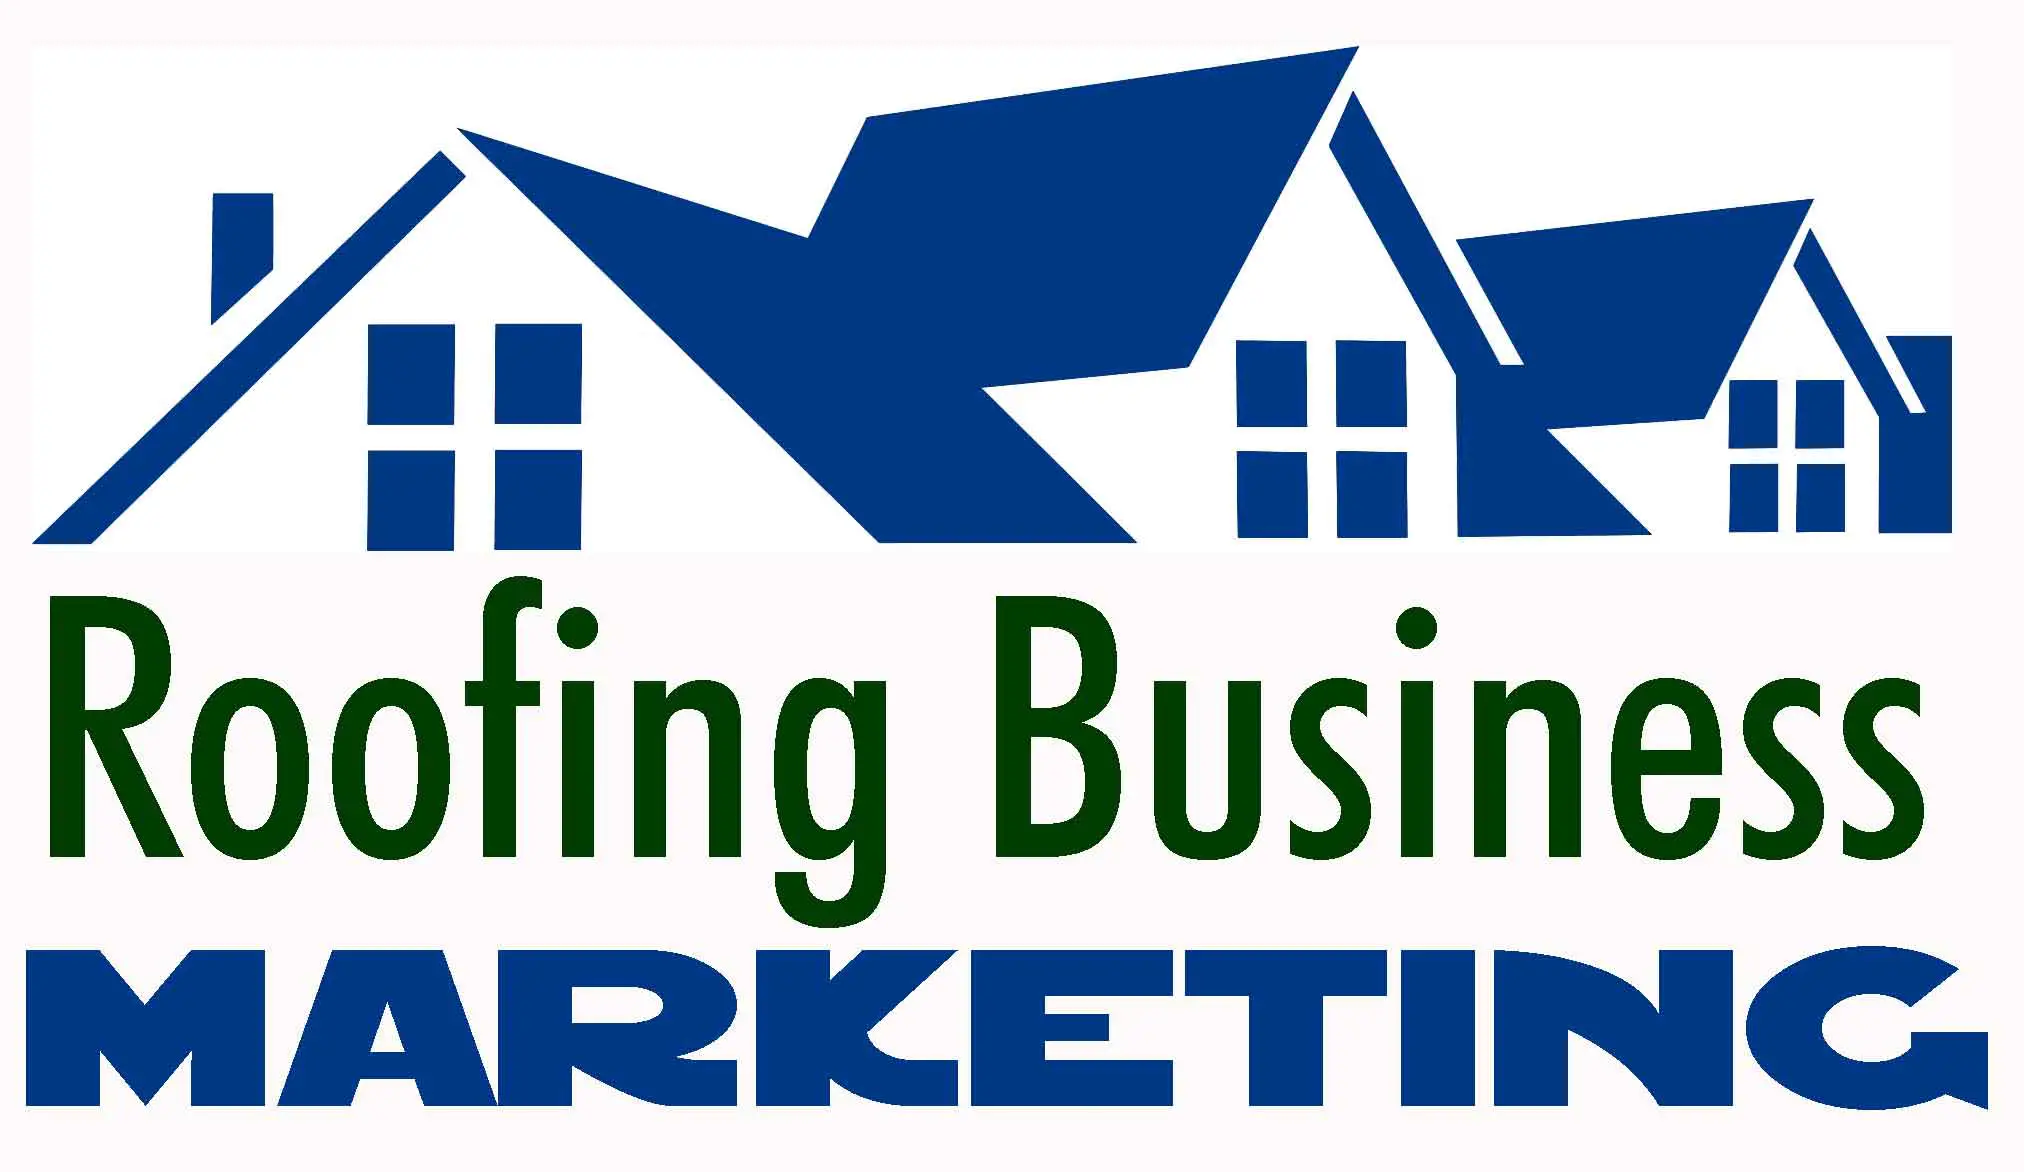 Roofing Marketing Ideas and Strategies